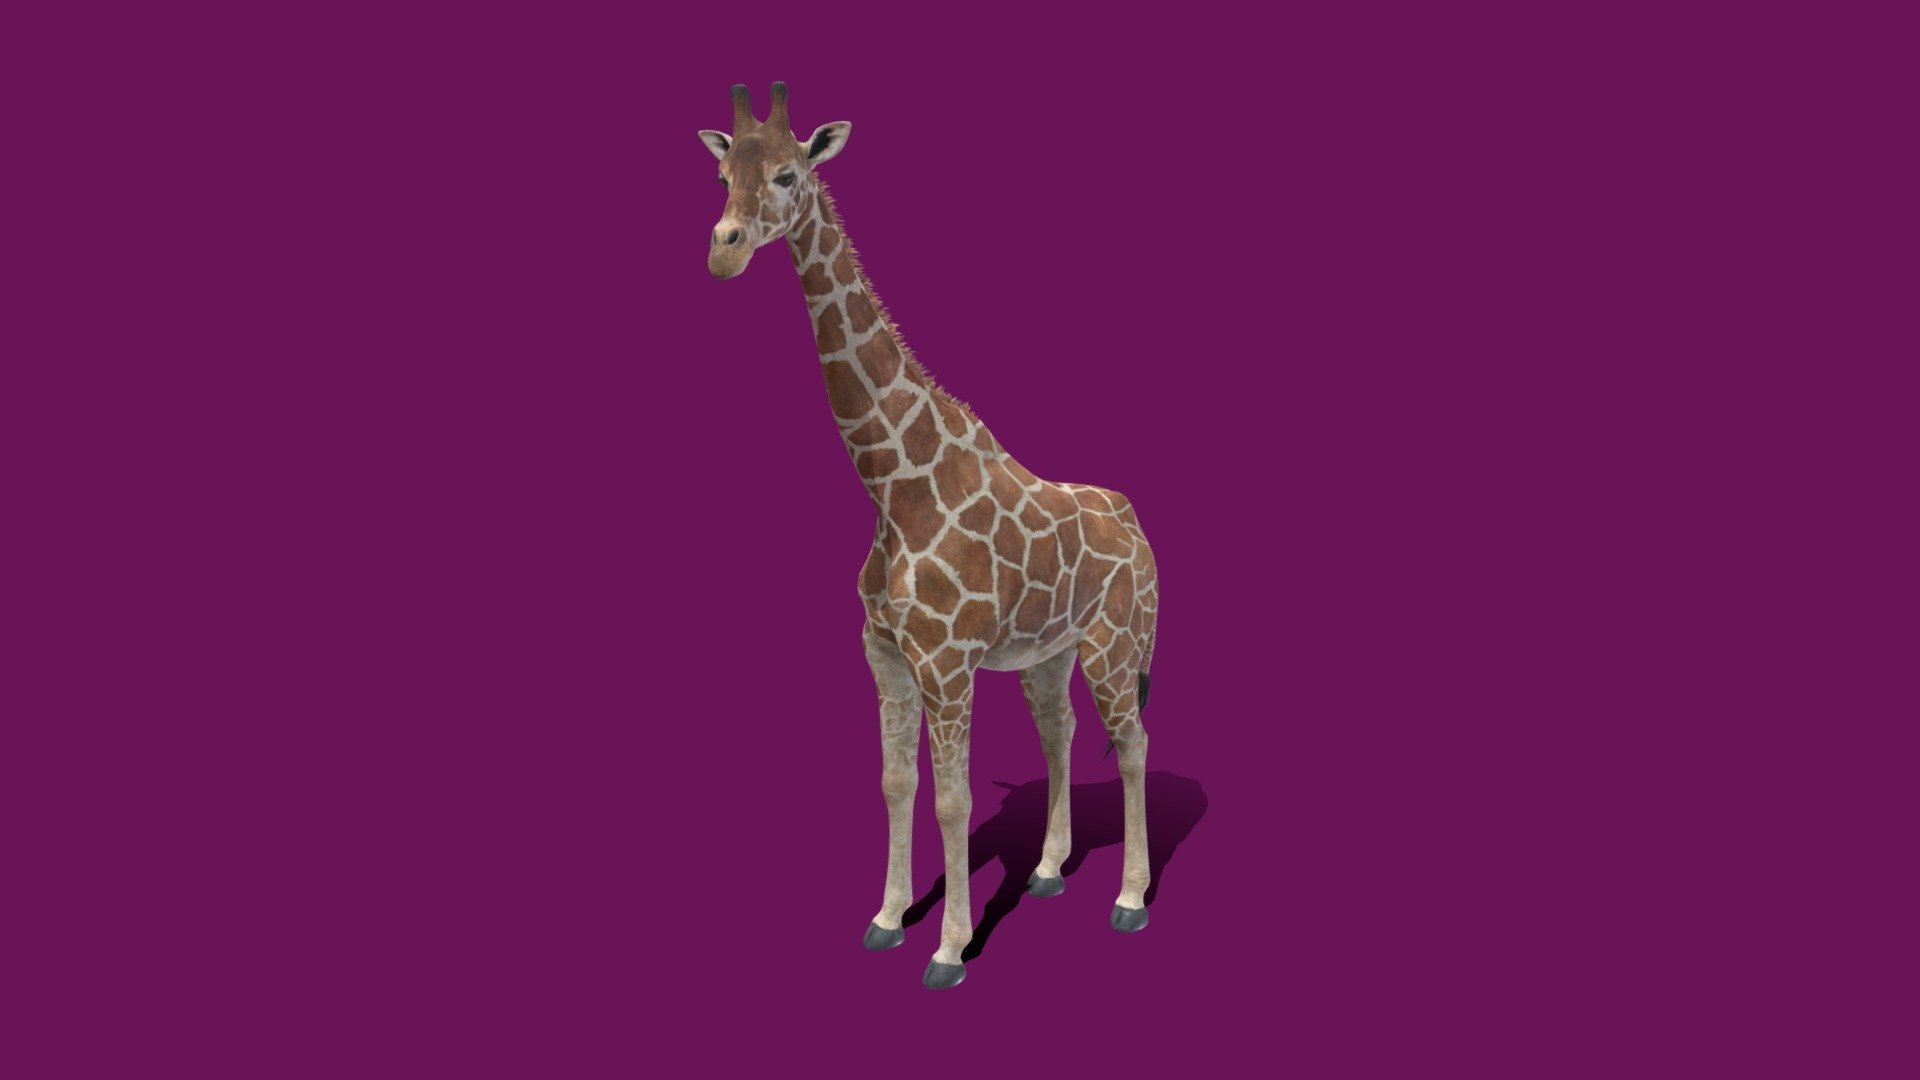 For Store 3D Preview link for beautiful animals store.
giraffe 3d animated model .
The giraffe is a large African hoofed mammal belonging to the genus Giraffa. It is the tallest living terrestrial animal and the largest ruminant on Earth. Traditionally, giraffes were thought to be one species, Giraffa camelopardalis, with nine subspecies.

Buy model here - Giraffe (beautifulanimals.store) - 3D model by Beautiful Animals (nyilonelycompany + theappgod) (@beautifulanimals) 3d model